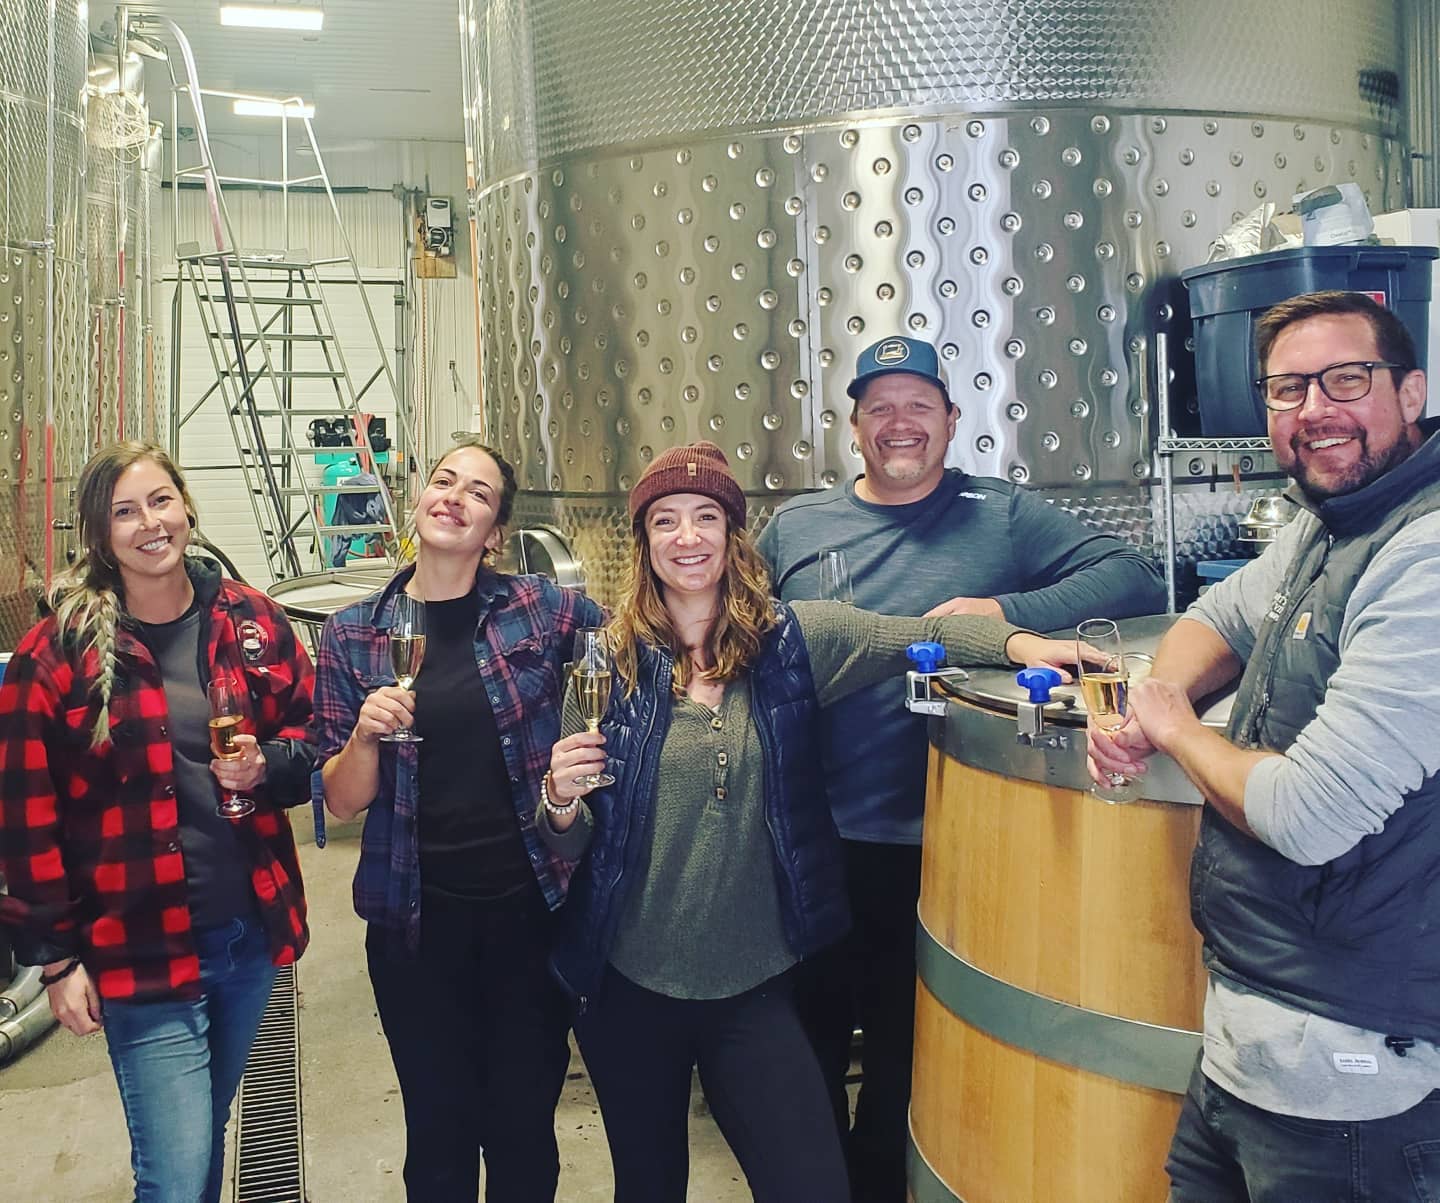 It’s been a busy few weeks here at Dirty Laundry Vineyard. There’s been many early mornings, late nights, and a lot of hard work by our team to round out the 2020 harvest season.